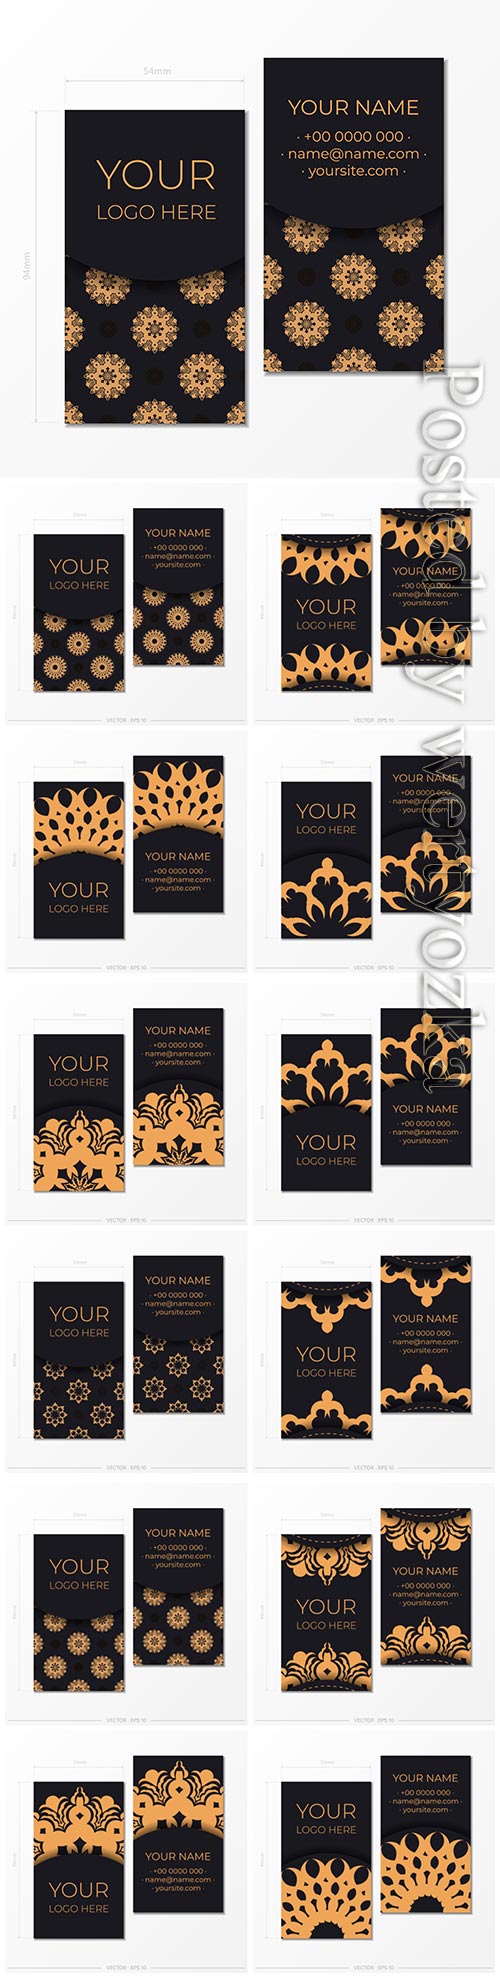 Business cards vector template with decorative oriental floral illustration